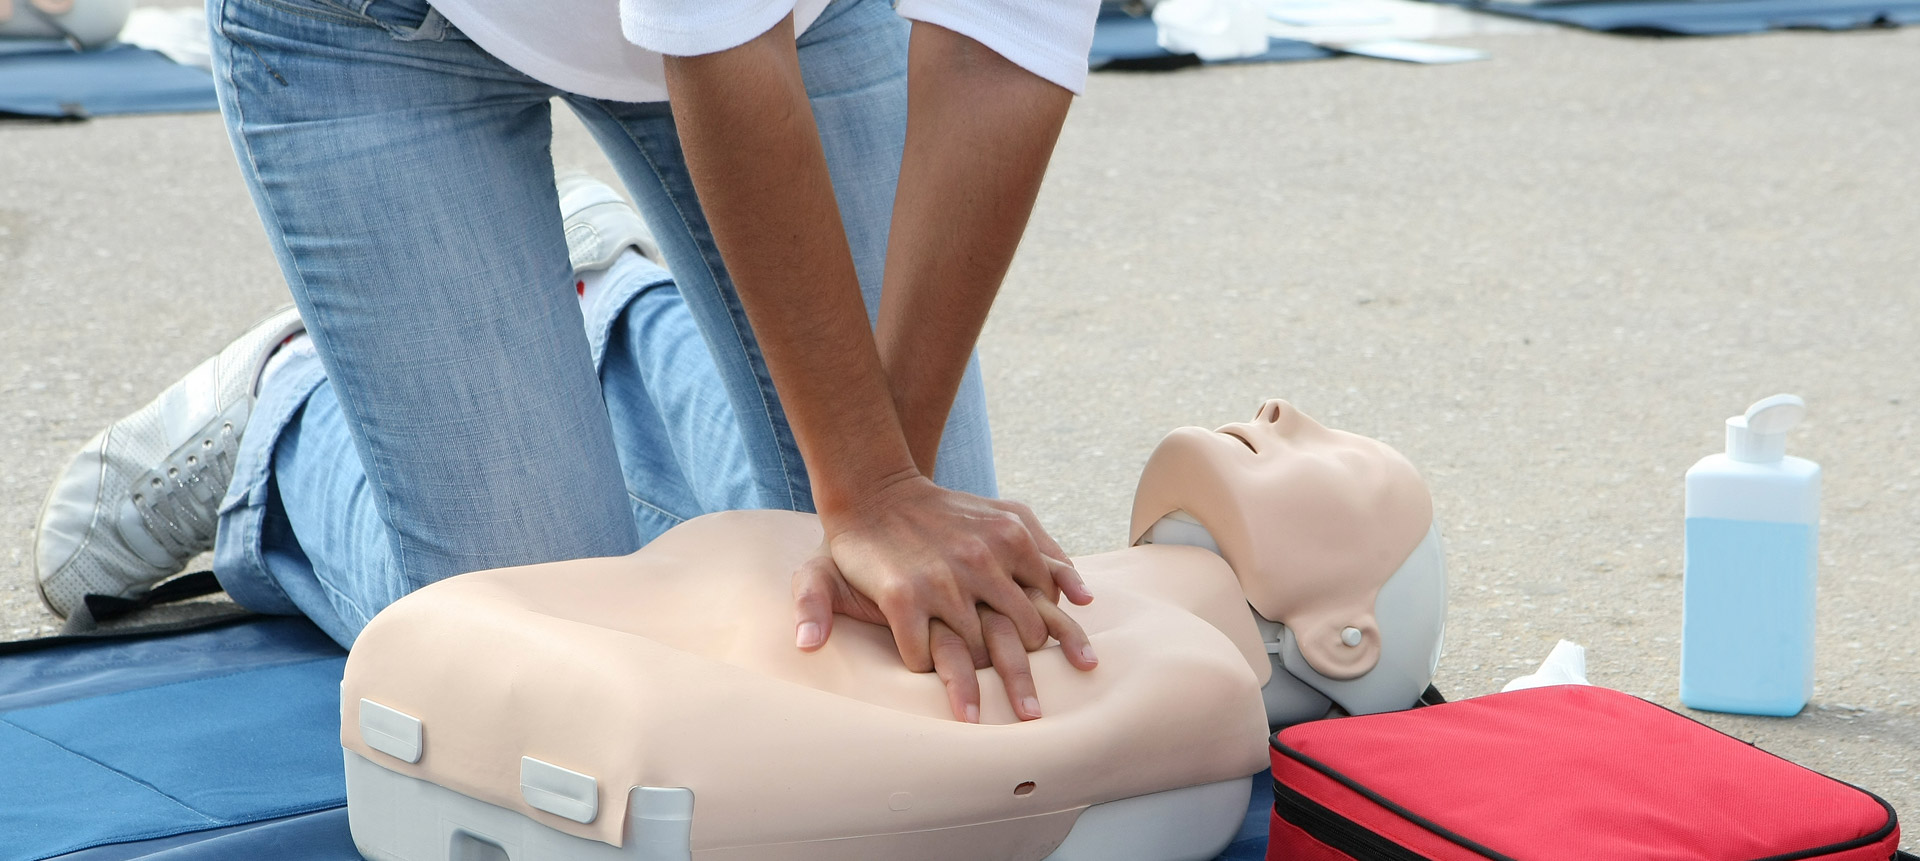 A woman performs chest compressions on a mannequin during an outside CPR training session